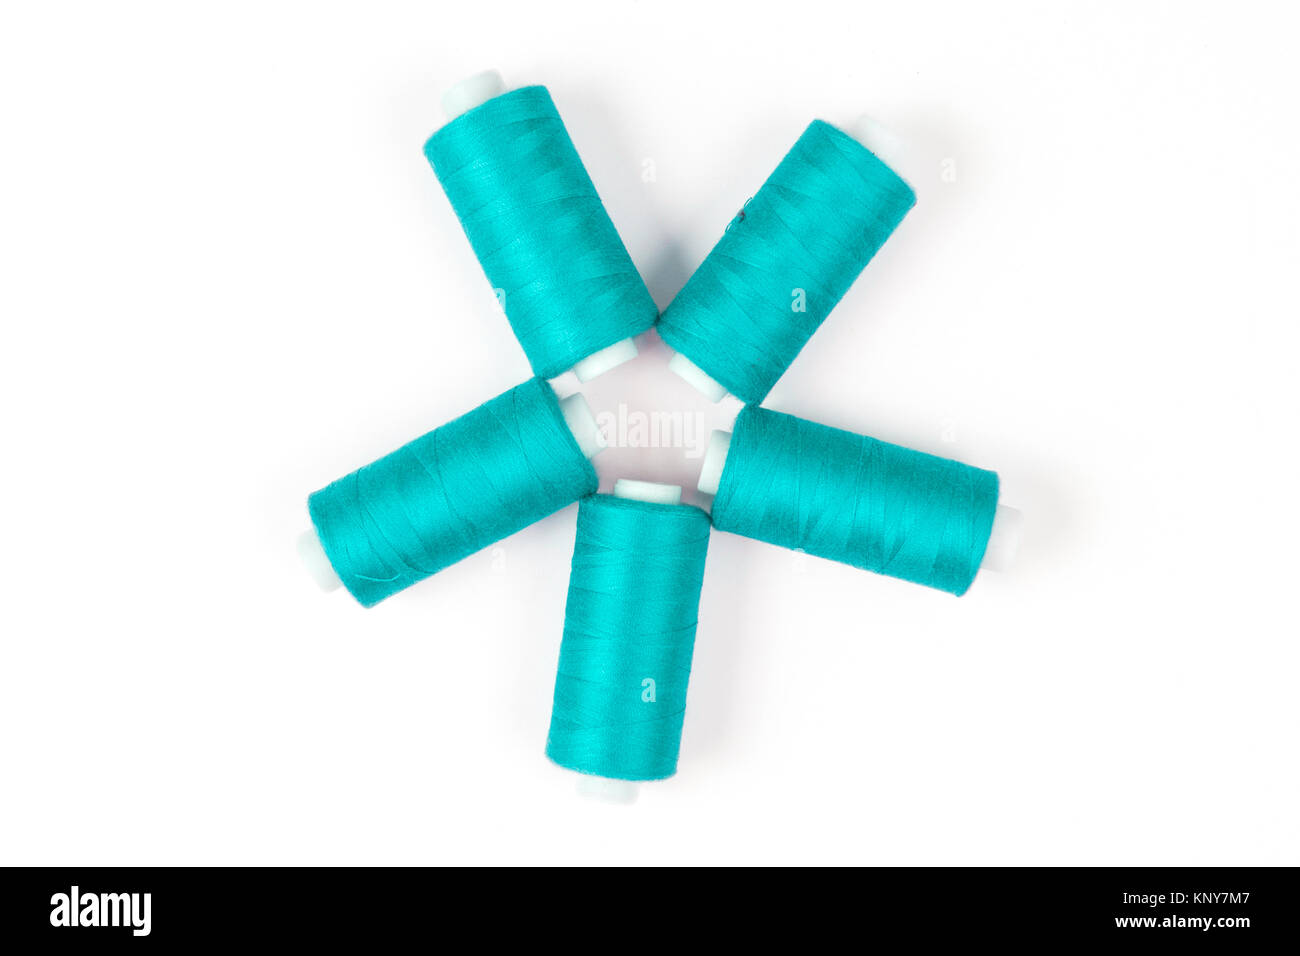 Five turquoise sewing threads laying in a circle on a white background, sewing accessories Stock Photo